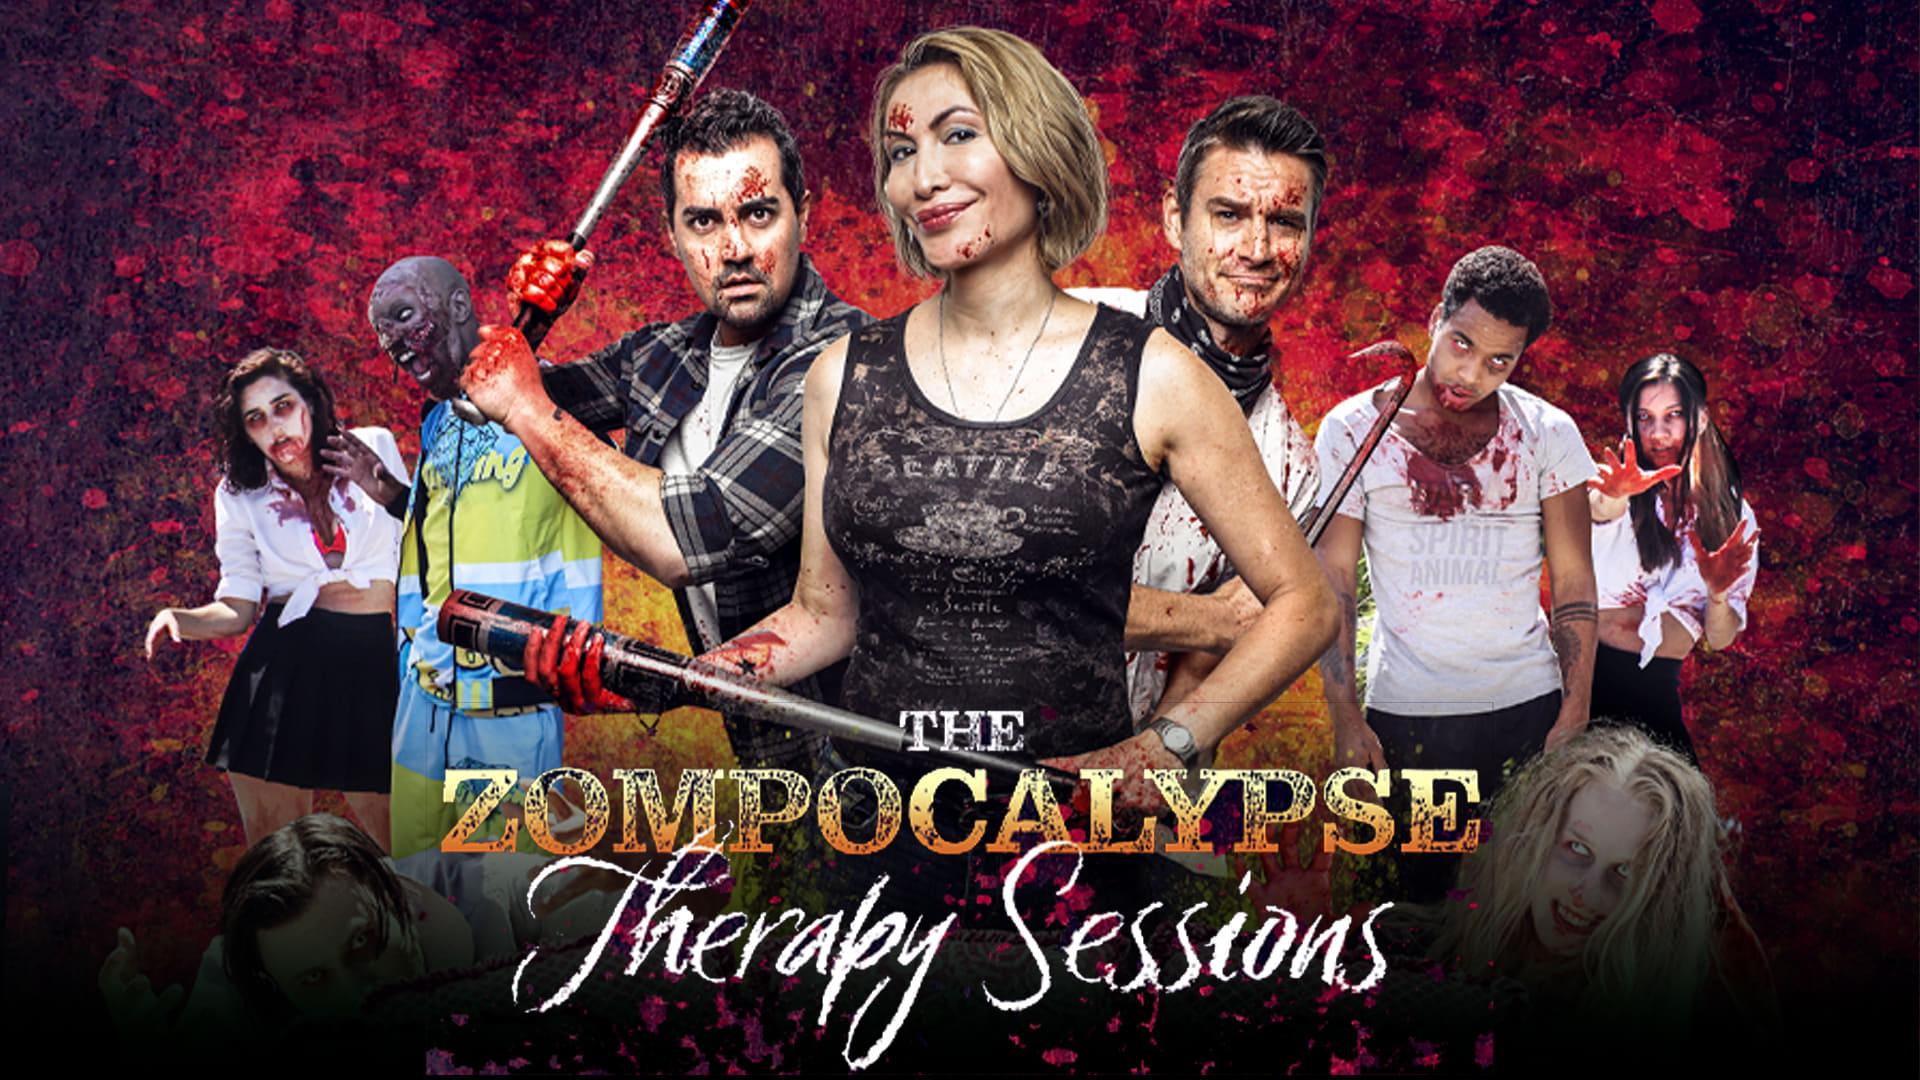 The Zompocalypse Therapy Sessions backdrop